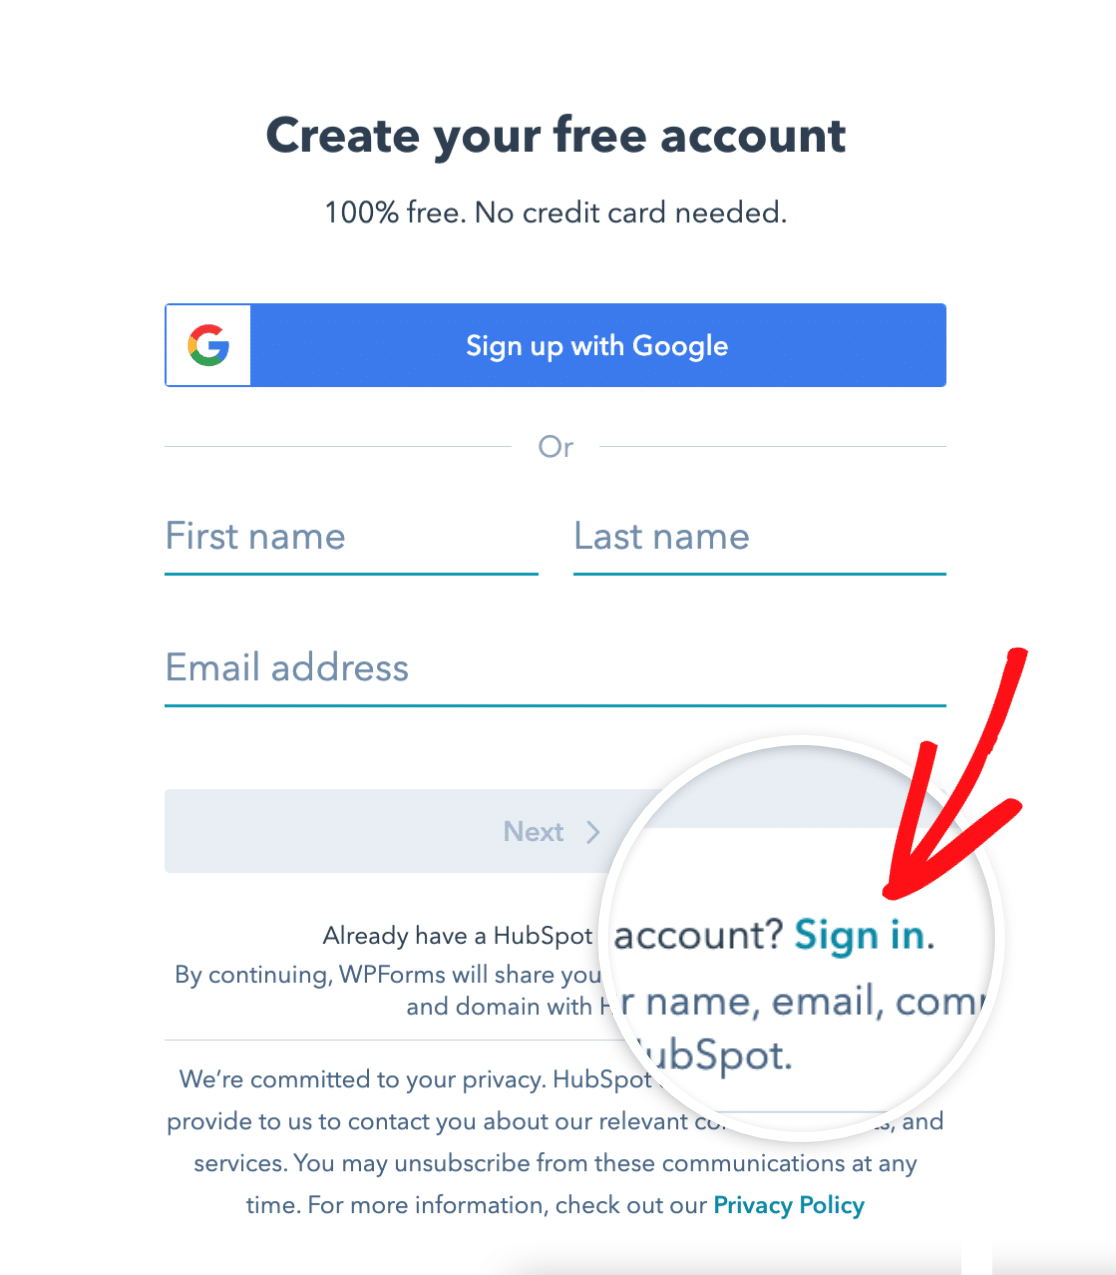 Sign in to an existing account